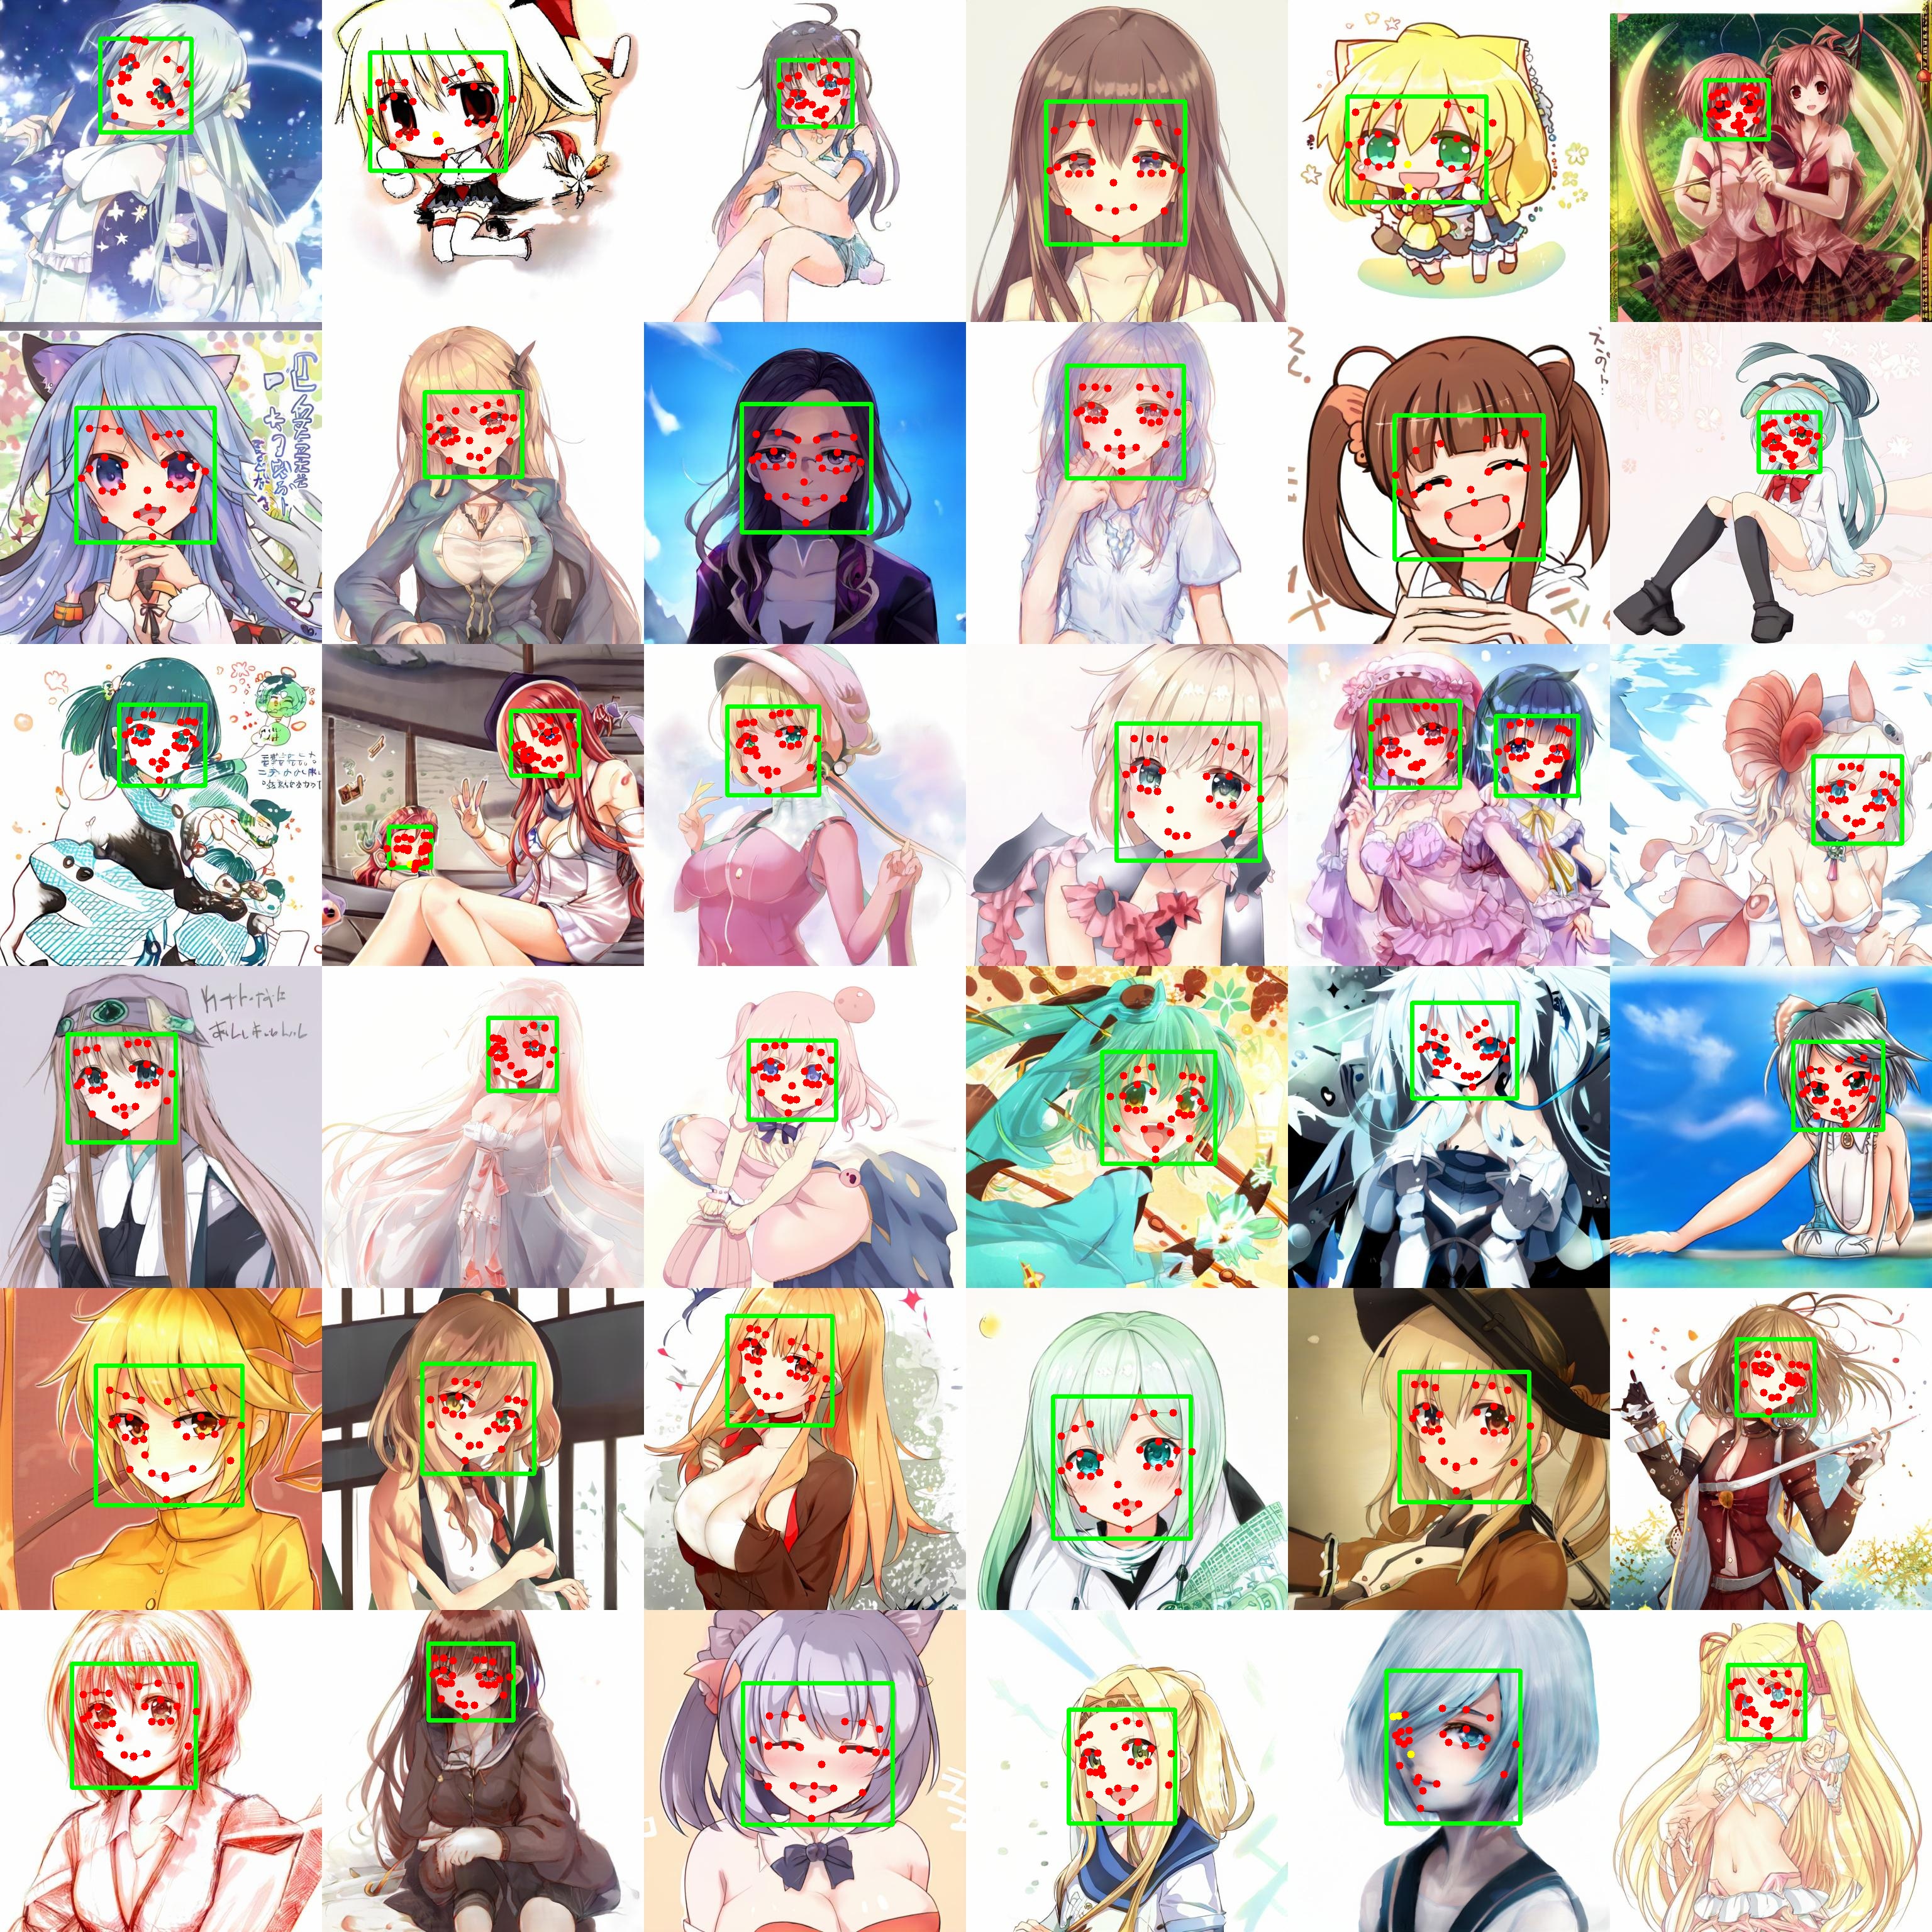 Female Anime Face Stock Photos - 30,305 Images | Shutterstock